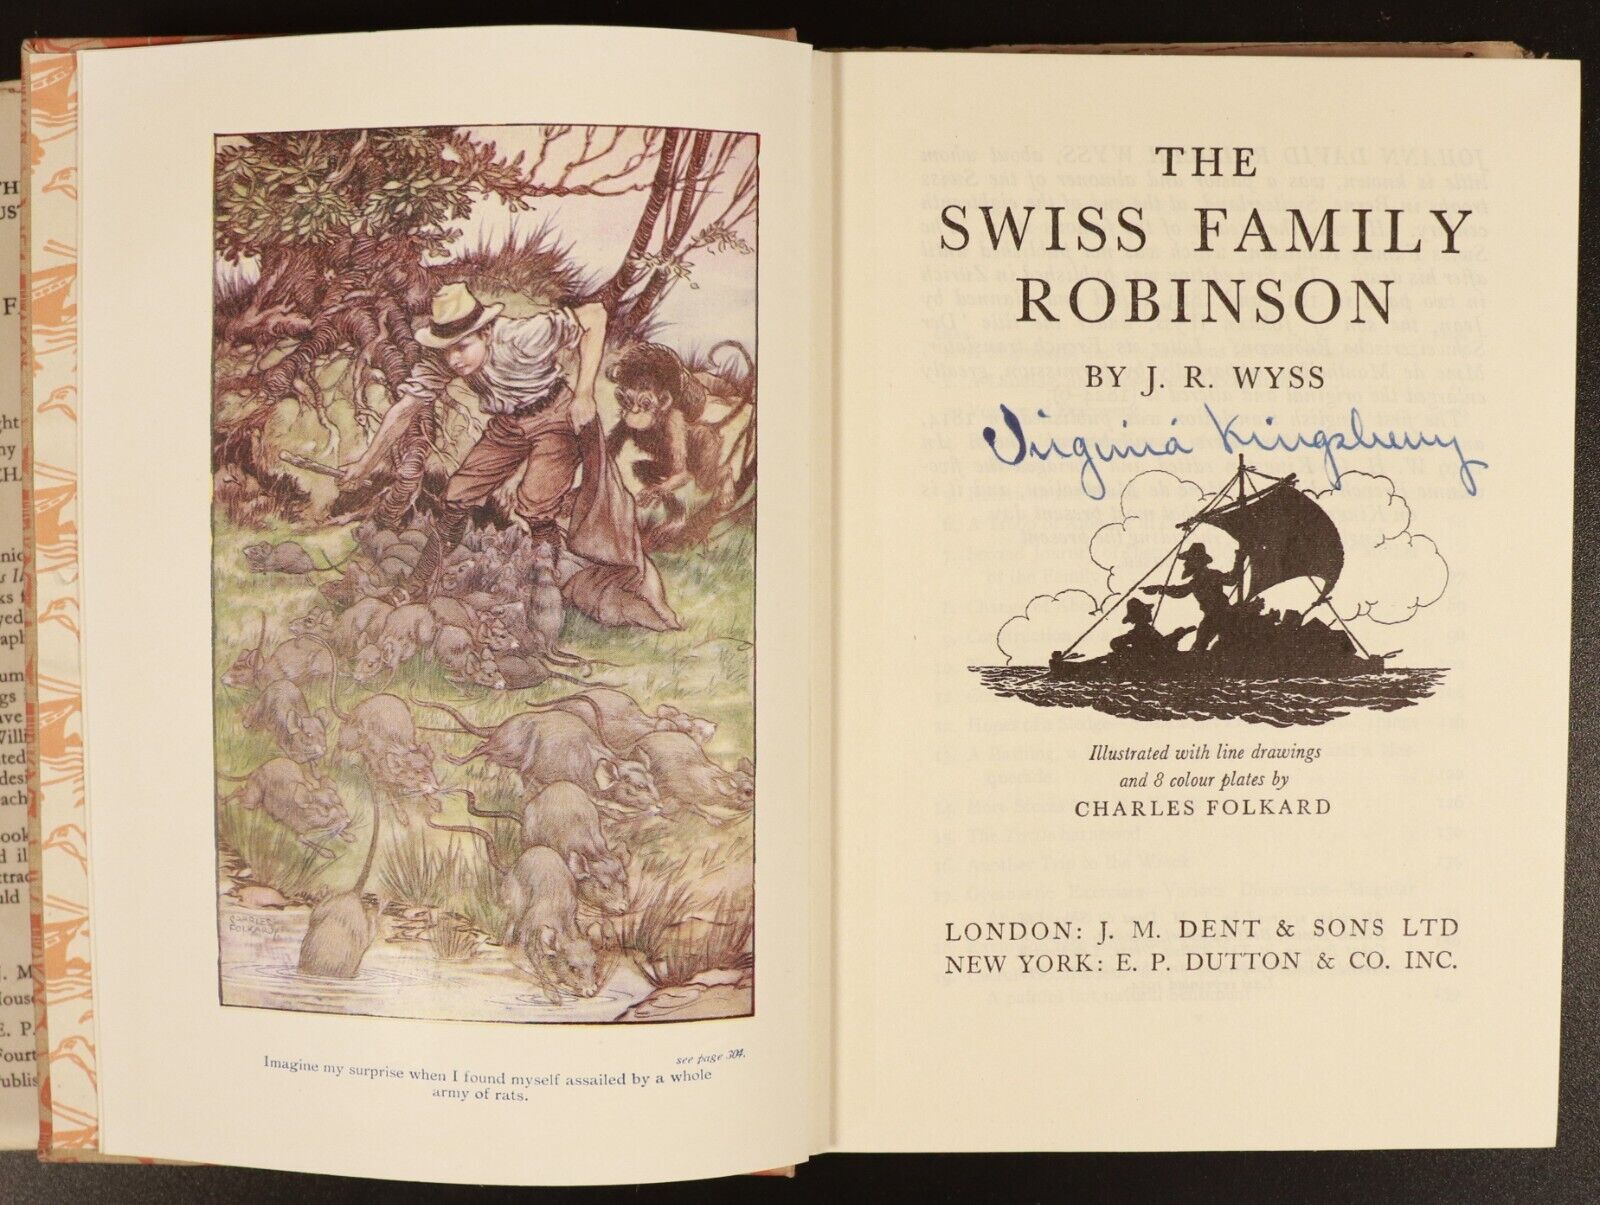 1954 The Swiss Family Robinson by J.R. Wyss Classic Childrens Fiction Book - 0